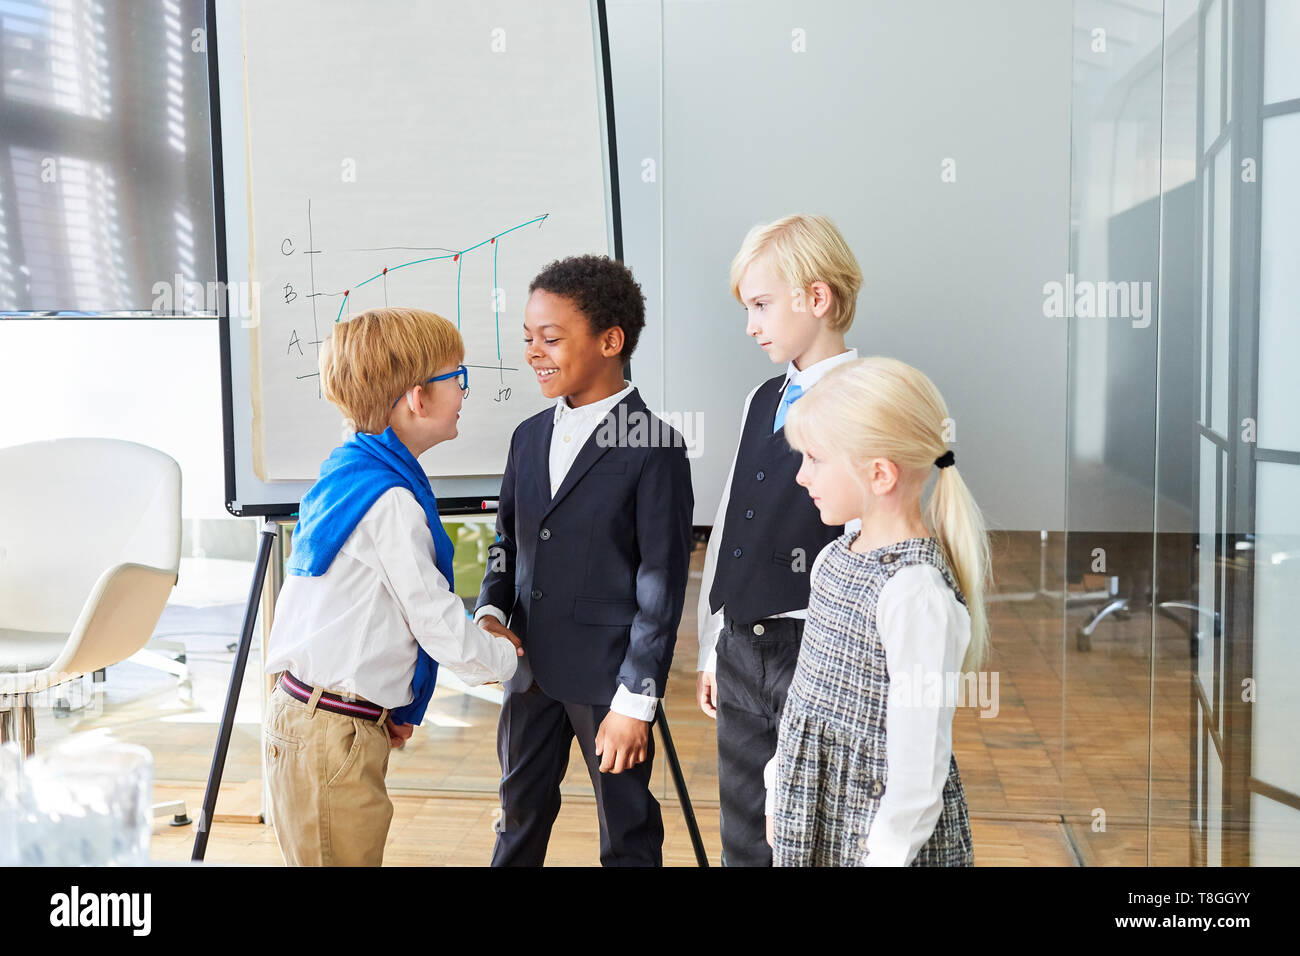 Business kids greet each other with a handshake before the negotiations in the office Stock Photo